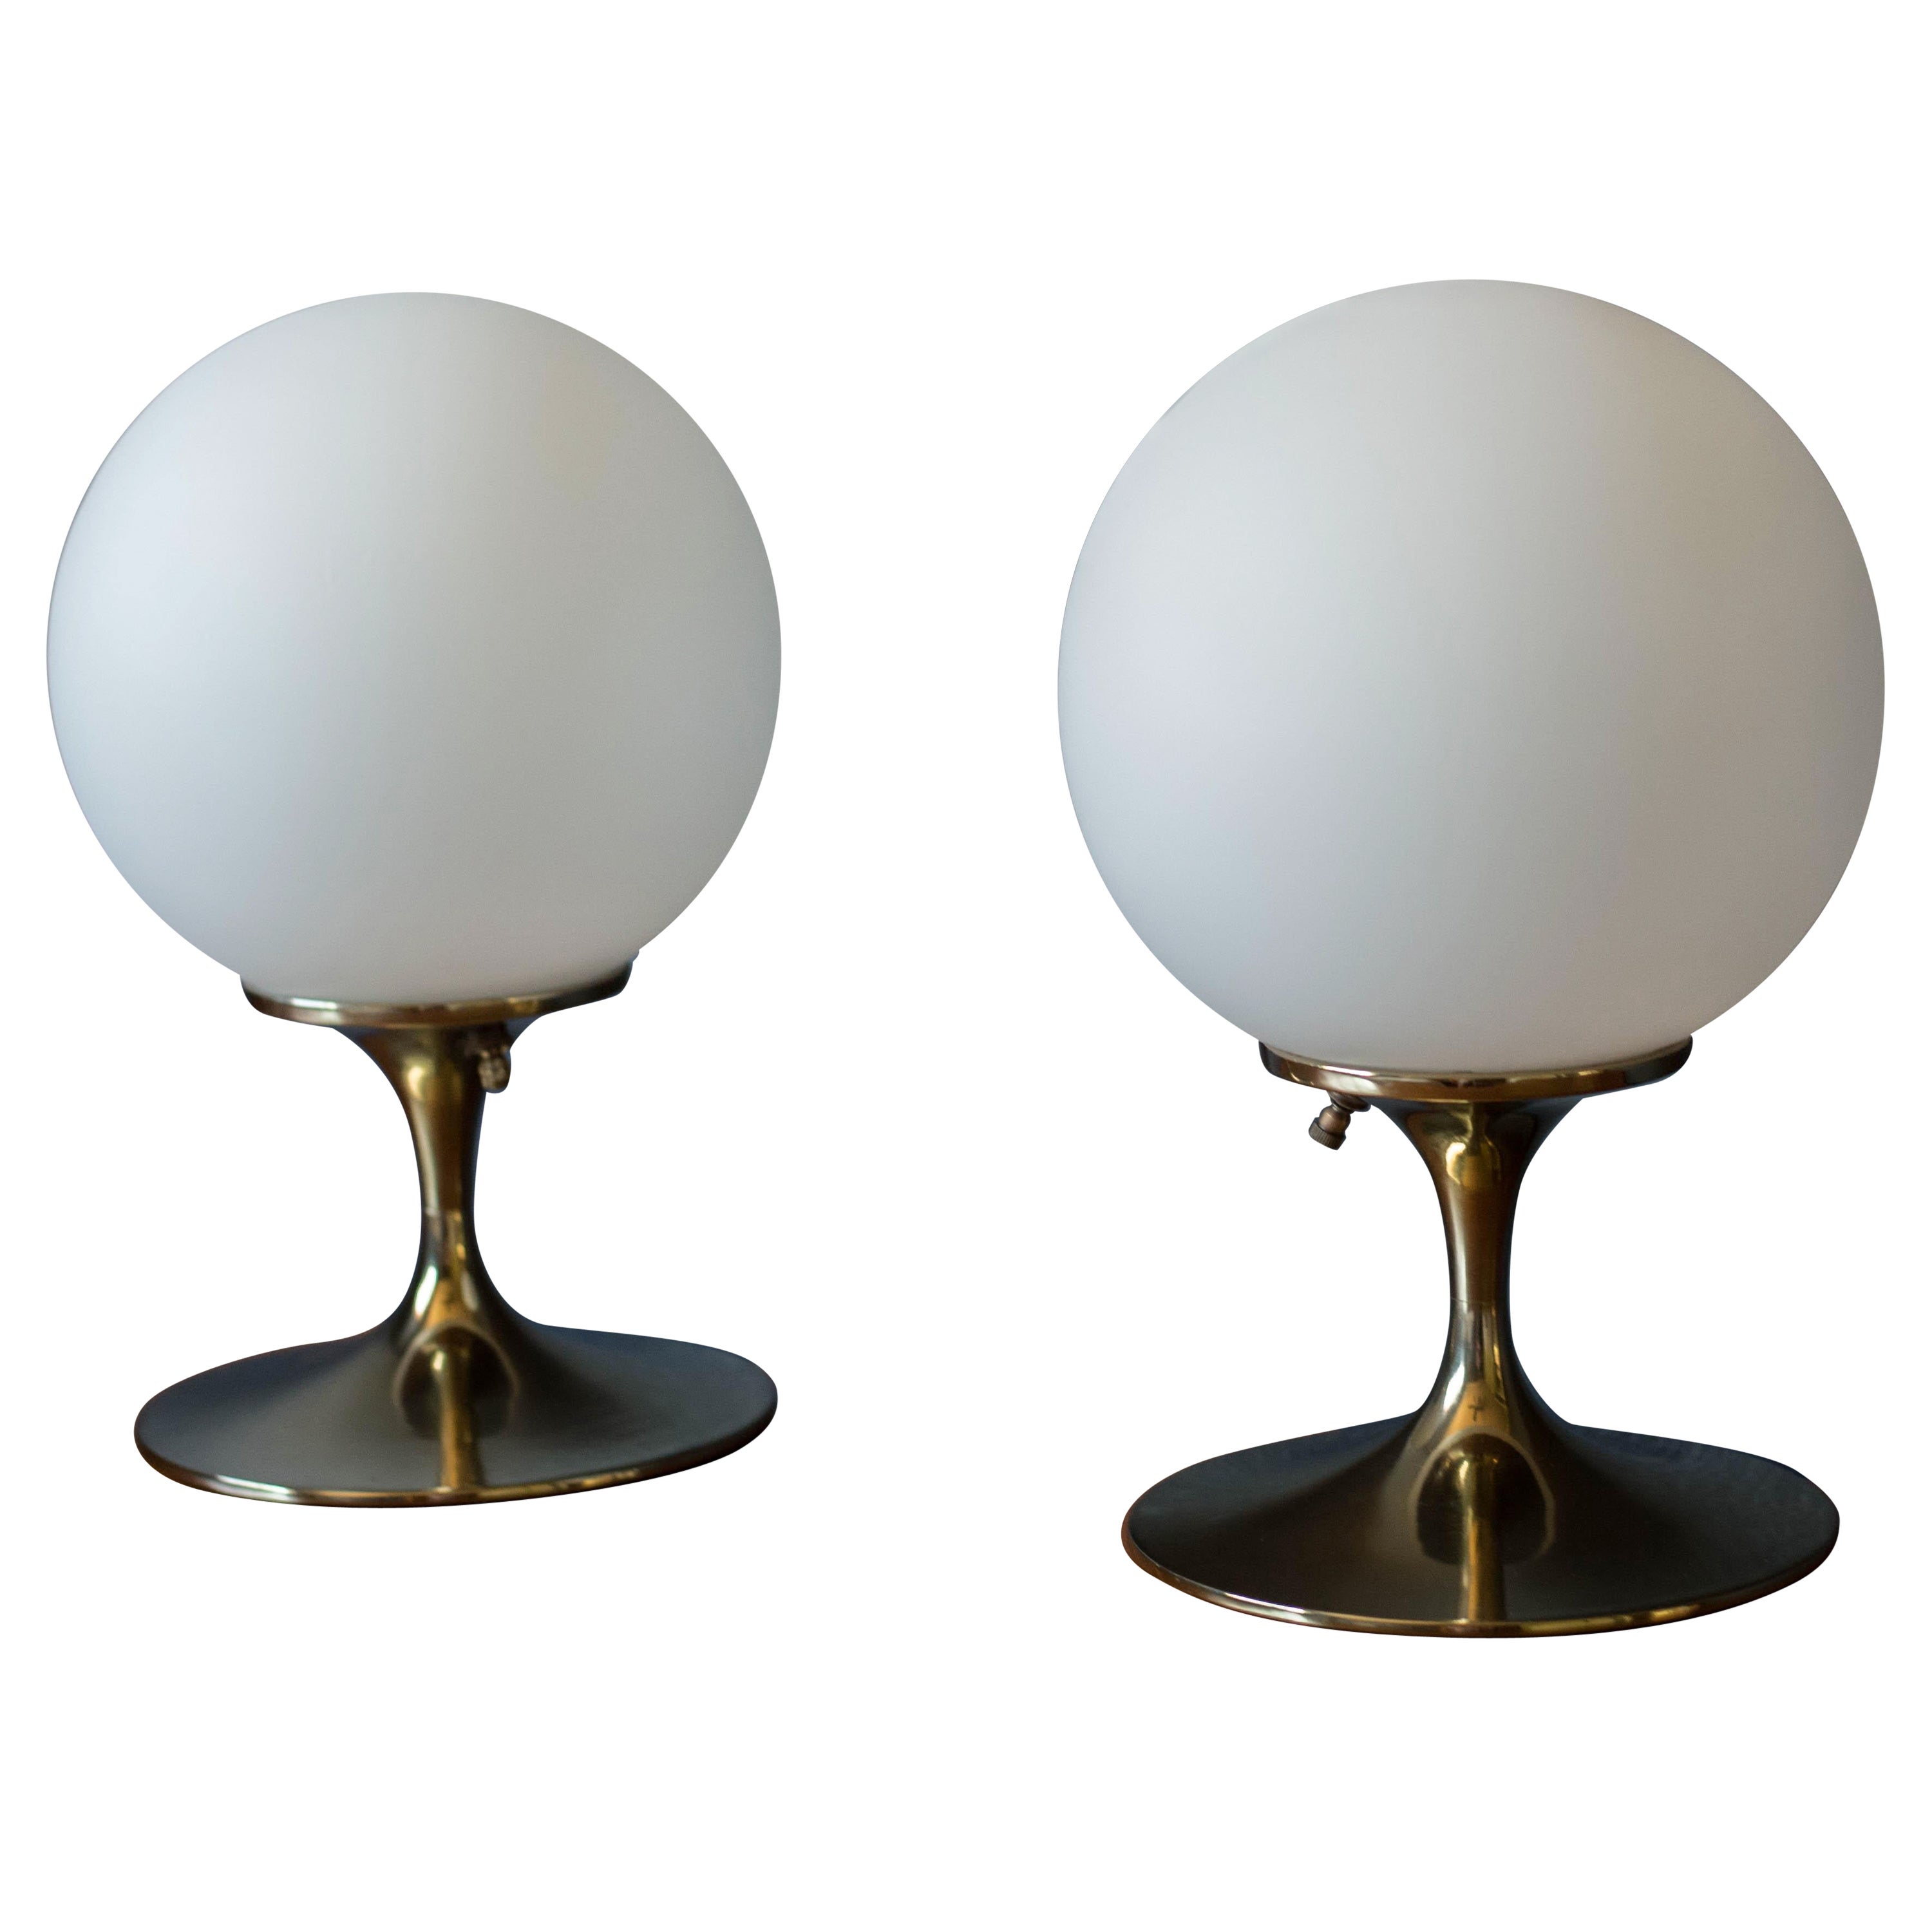 Vintage Pair of Sculptural Brass Round Globe Table Lamps by Laurel